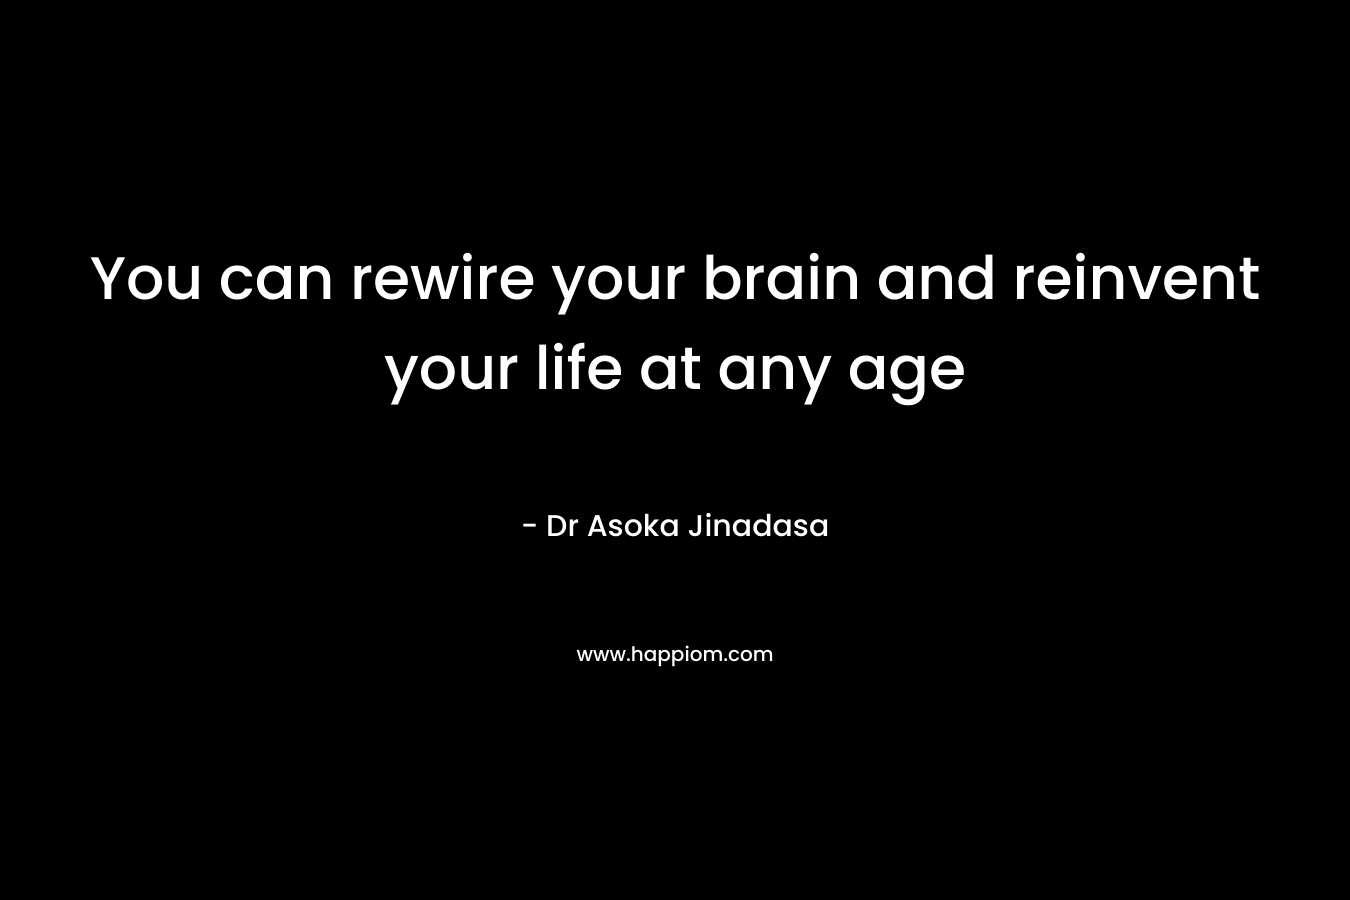 You can rewire your brain and reinvent your life at any age – Dr Asoka Jinadasa